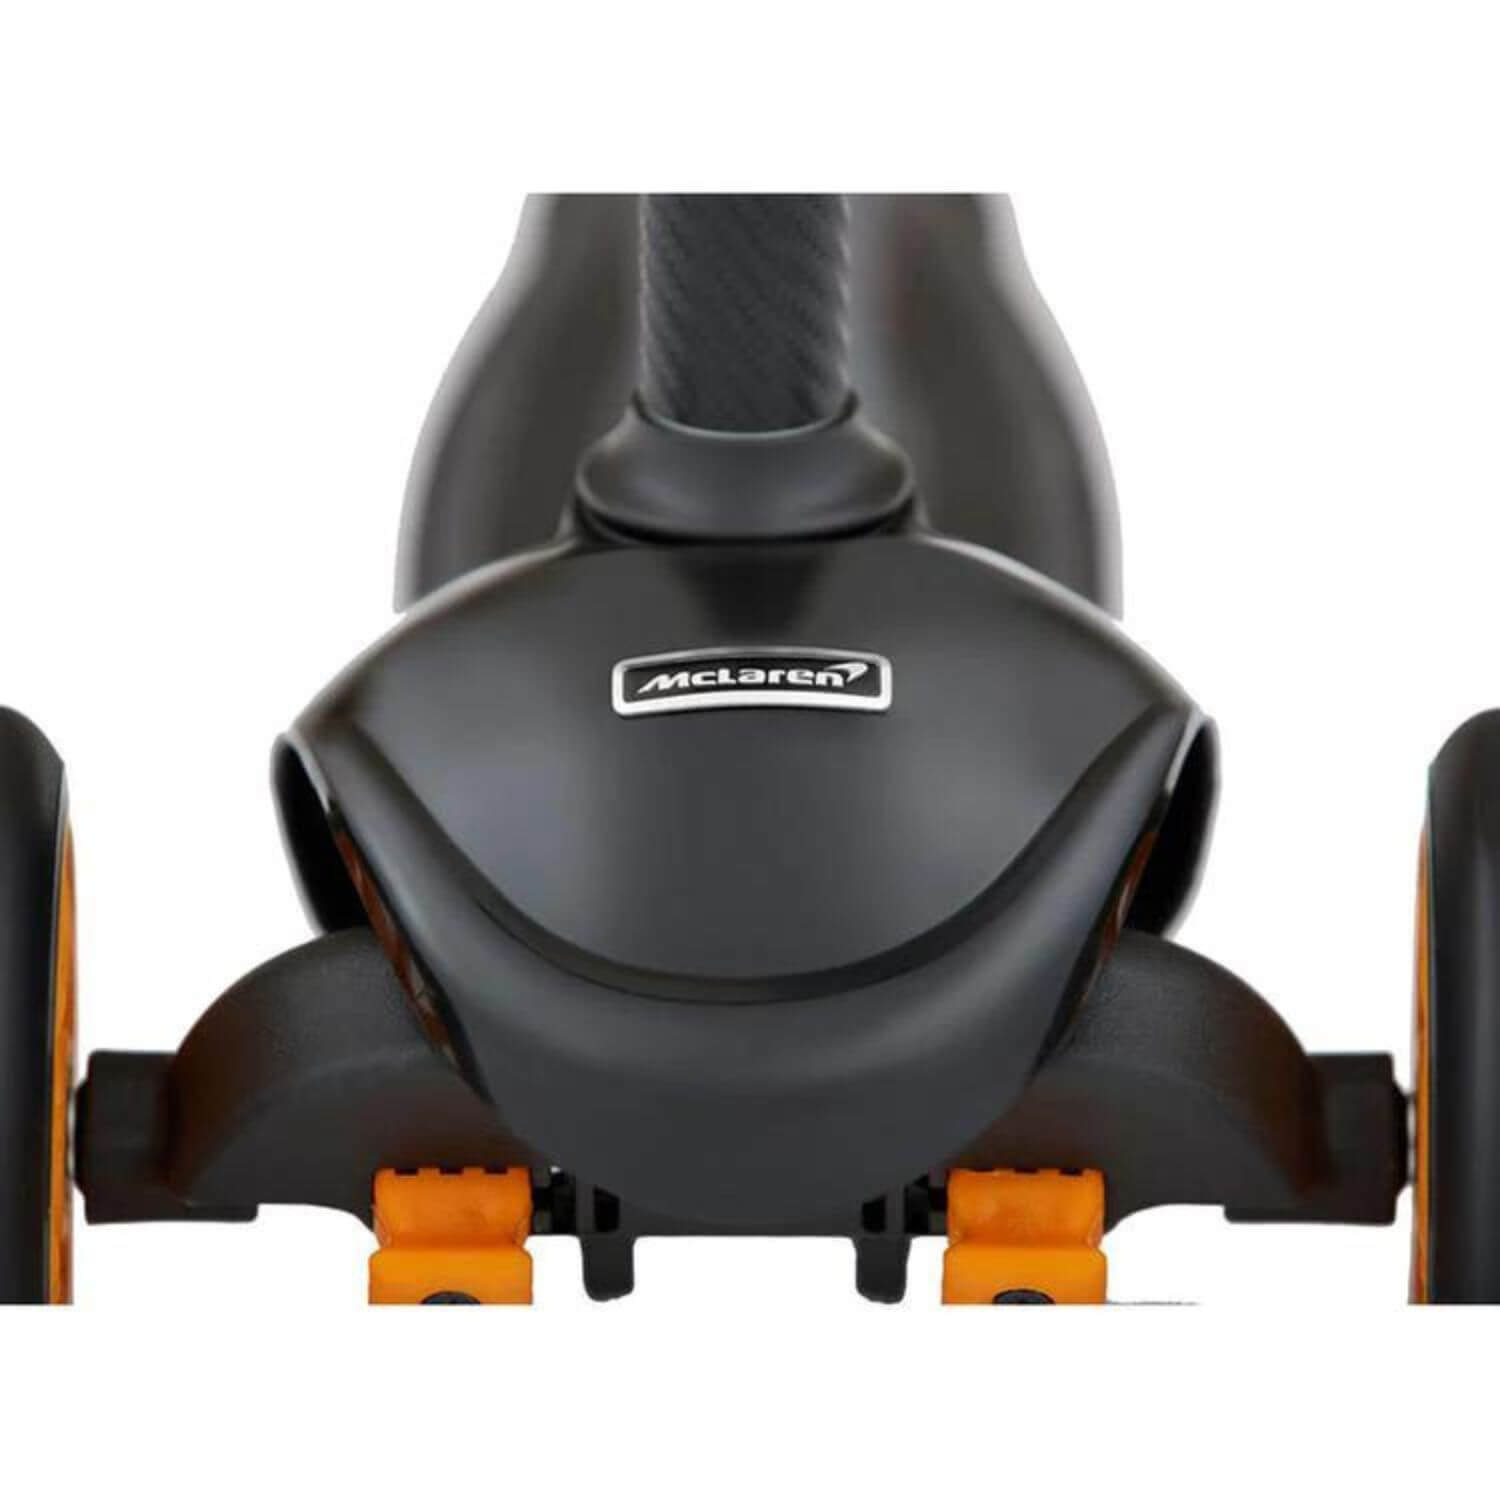 McLaren Scooters Toddler Size - Detail